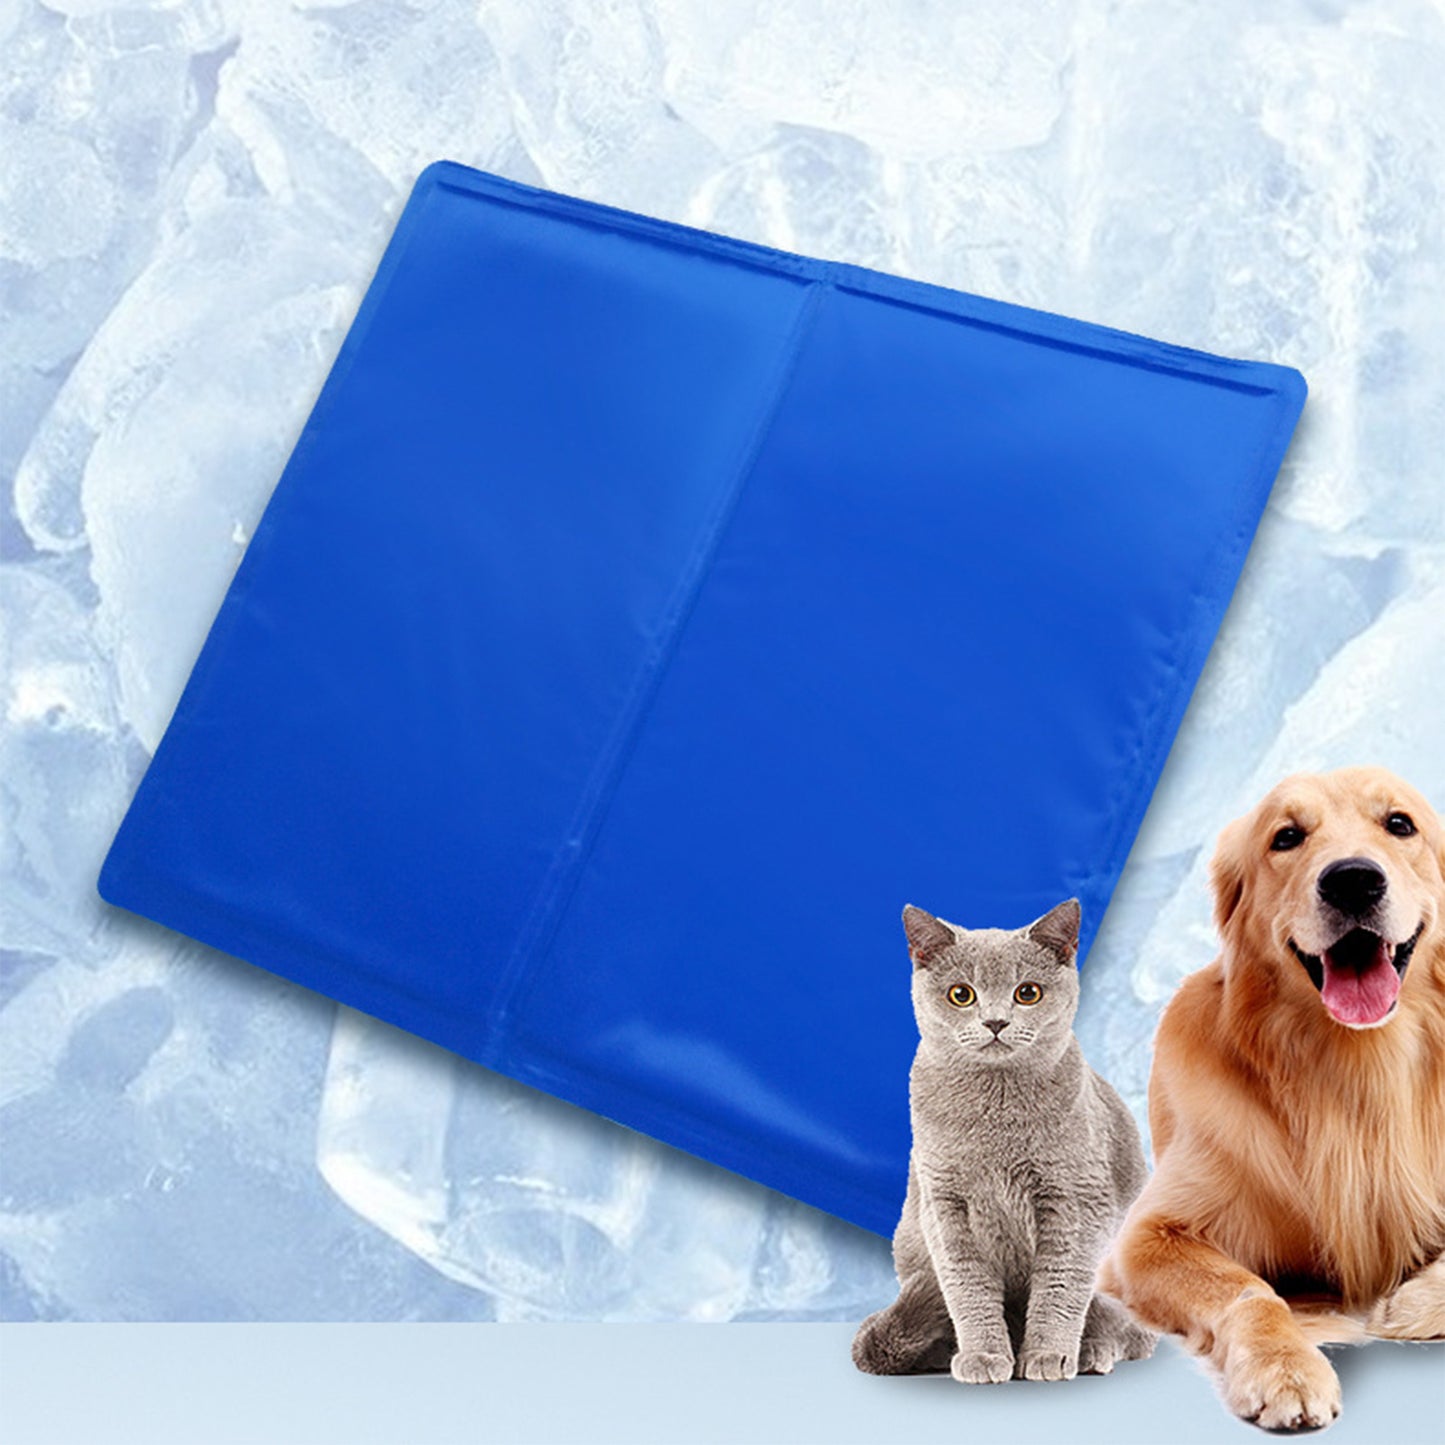 Pawfriends Summer Pet Ice Cushion Dog Cat Cooling Multi Functional Comfortable Cushion S